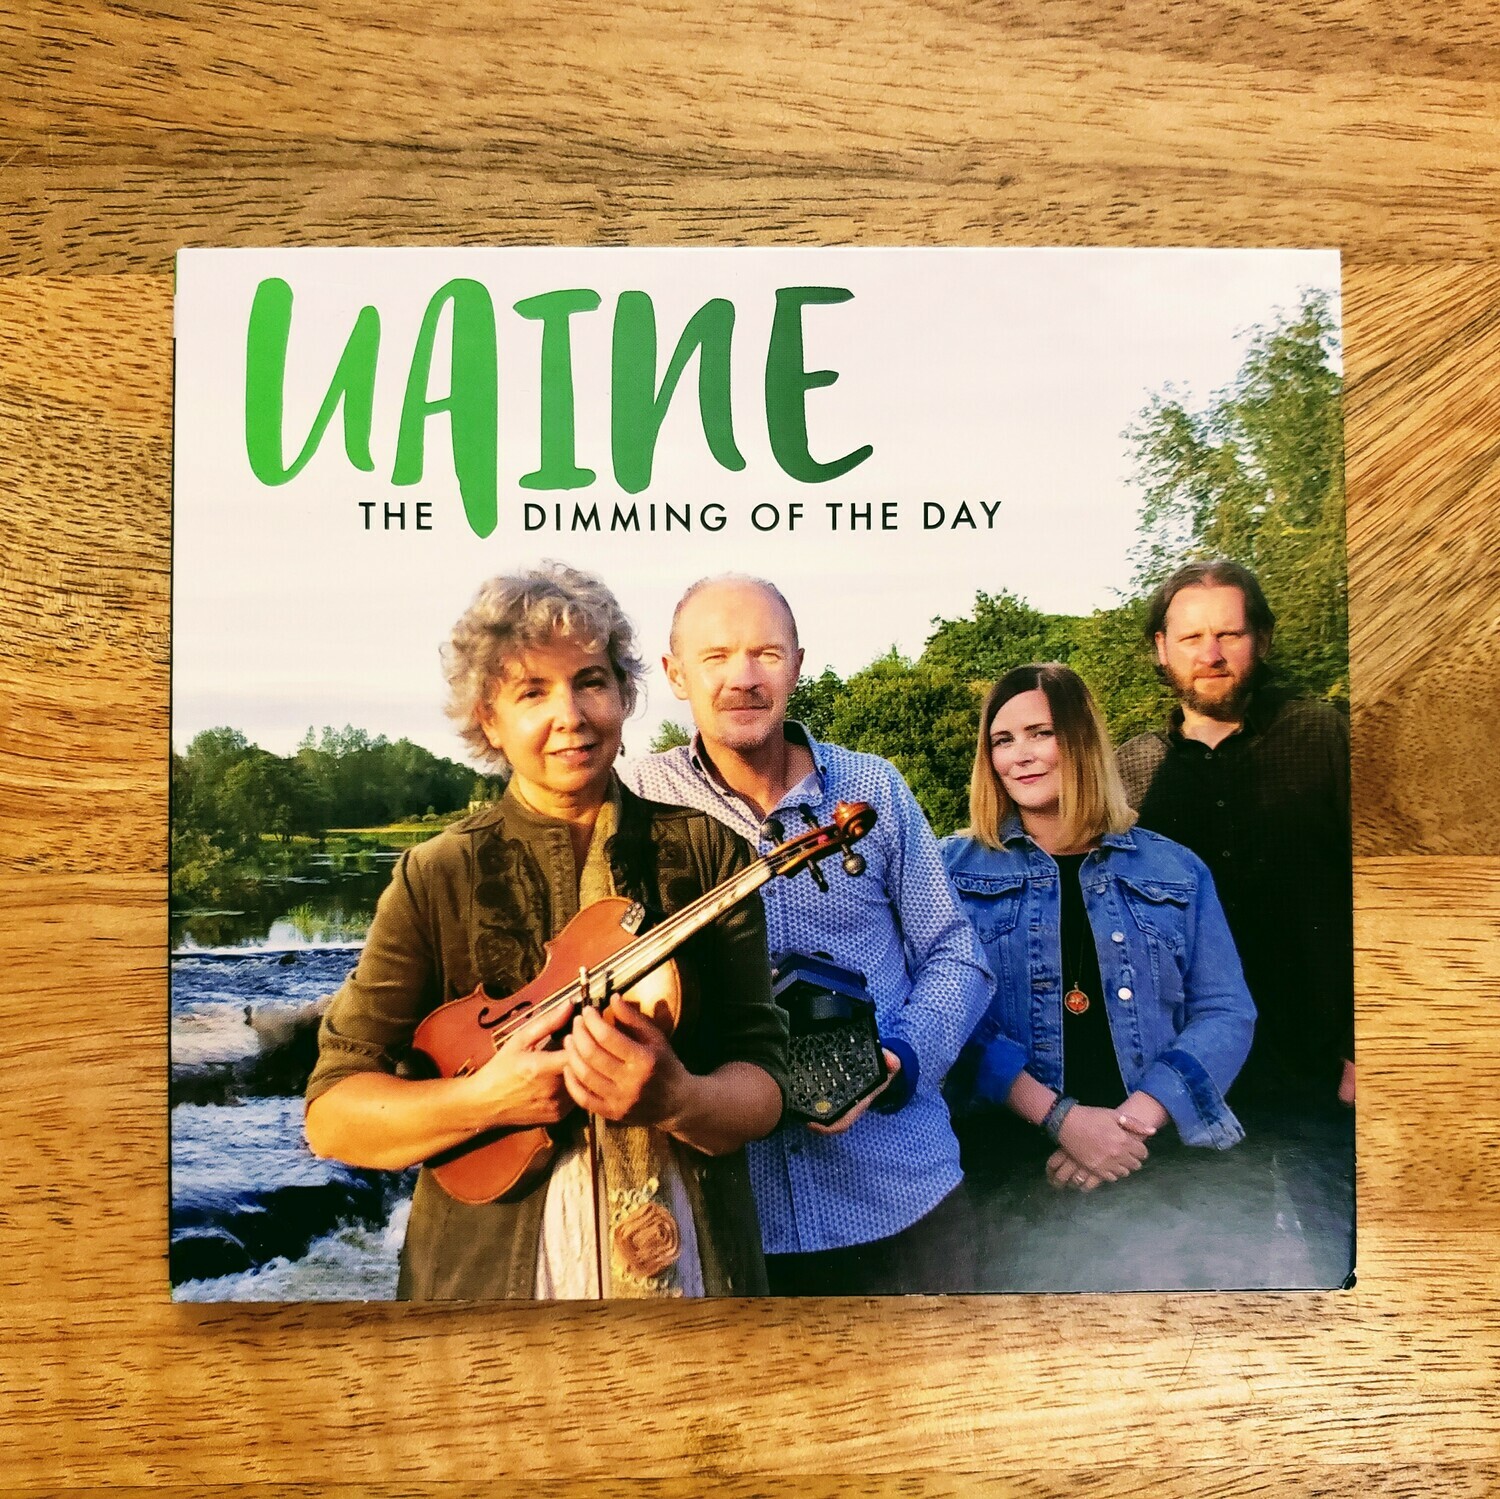 Uaine: Dimming of the Day (Bríd Harper, Tony O'Connell, Lisa Butler, Paul Meehan)